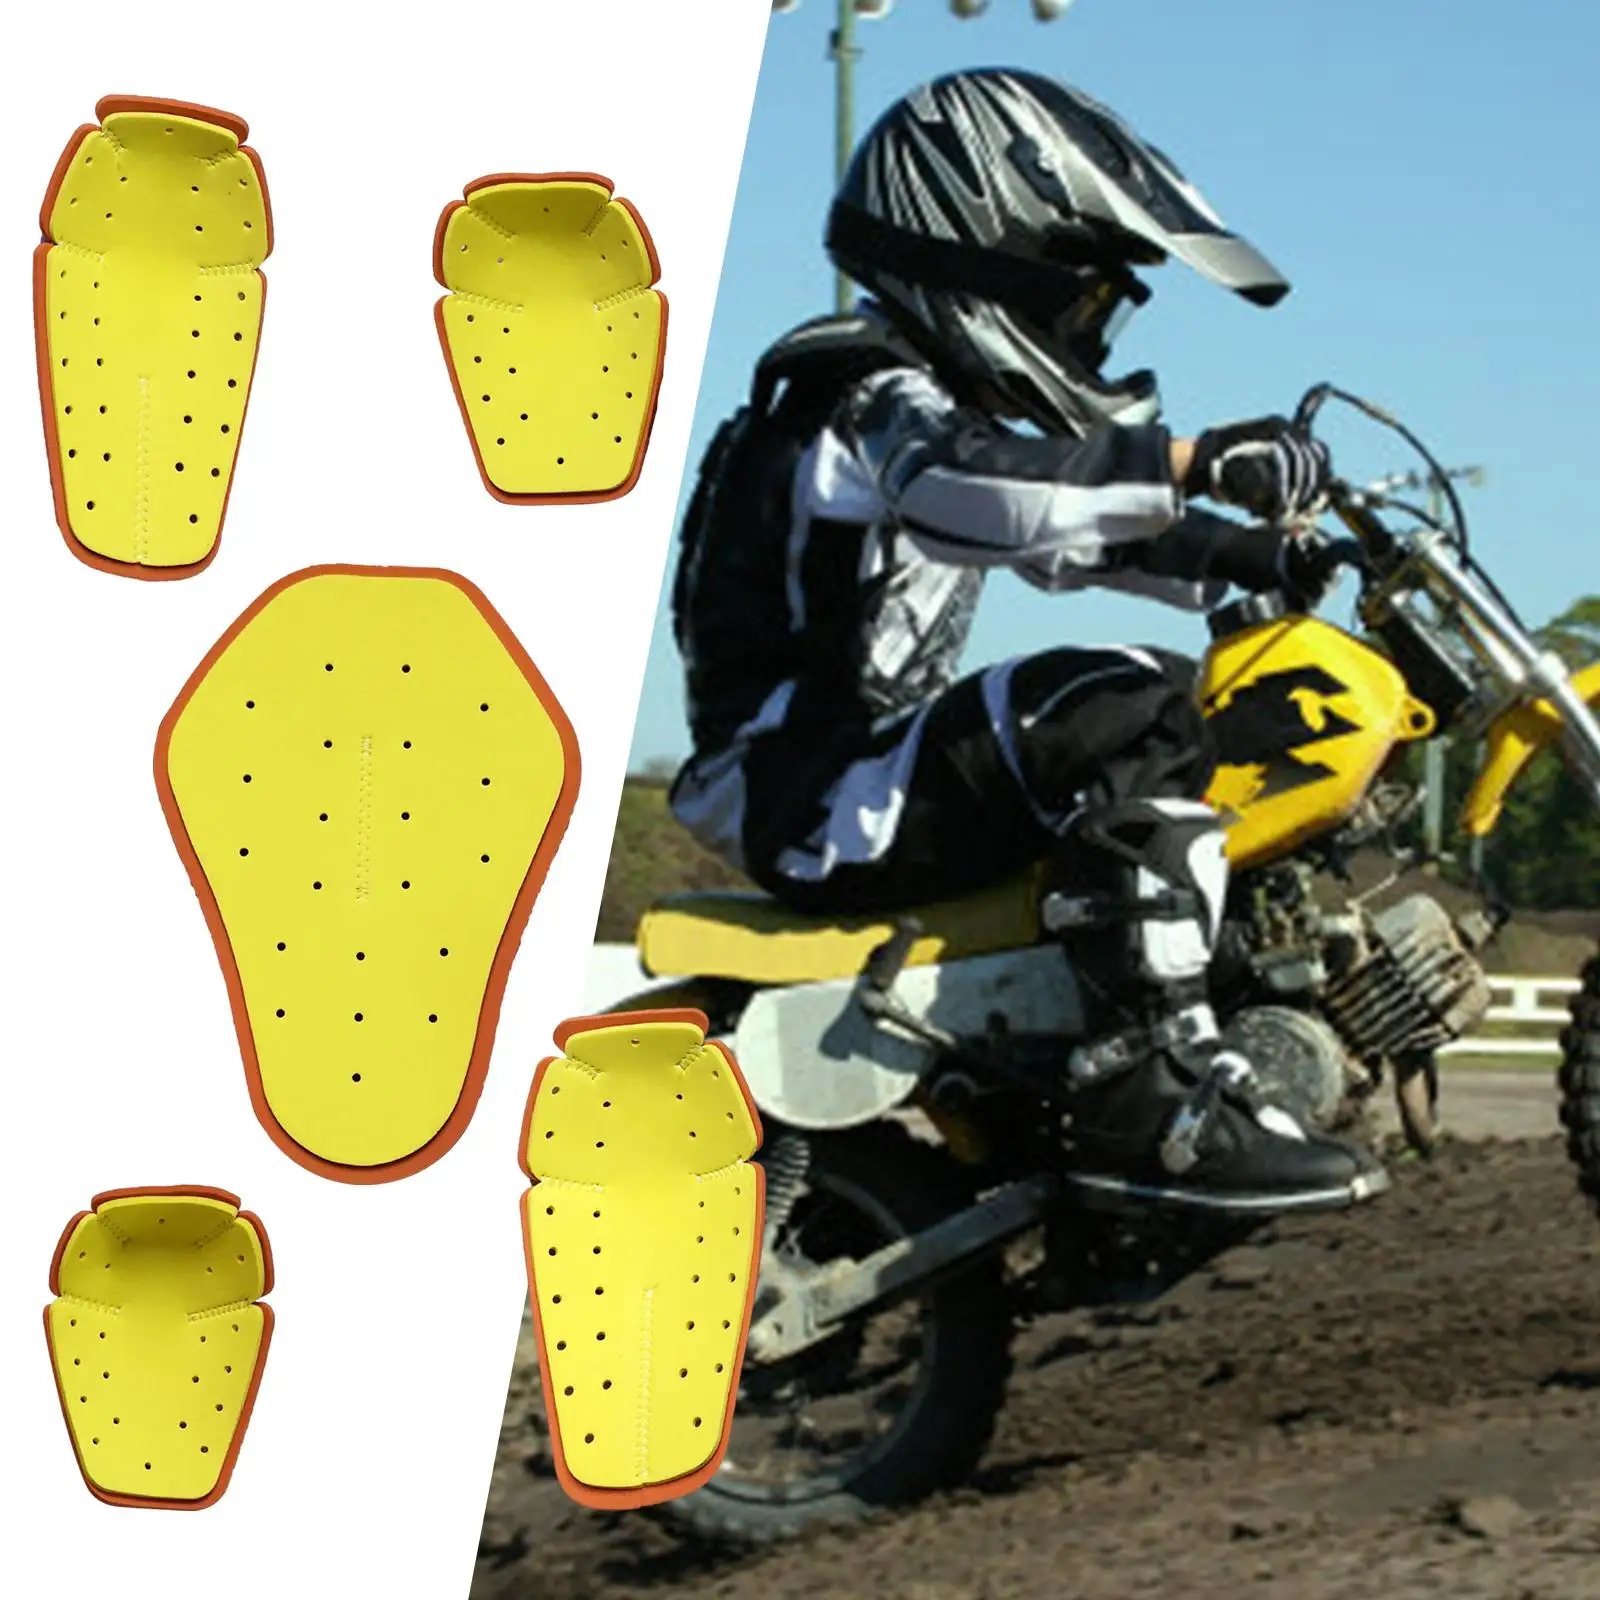 5Pieces Motorbike Protection Pad Comfortable Motorcycle Racing Riding EVA Motorbike Body Protective Gear for Motorcycle